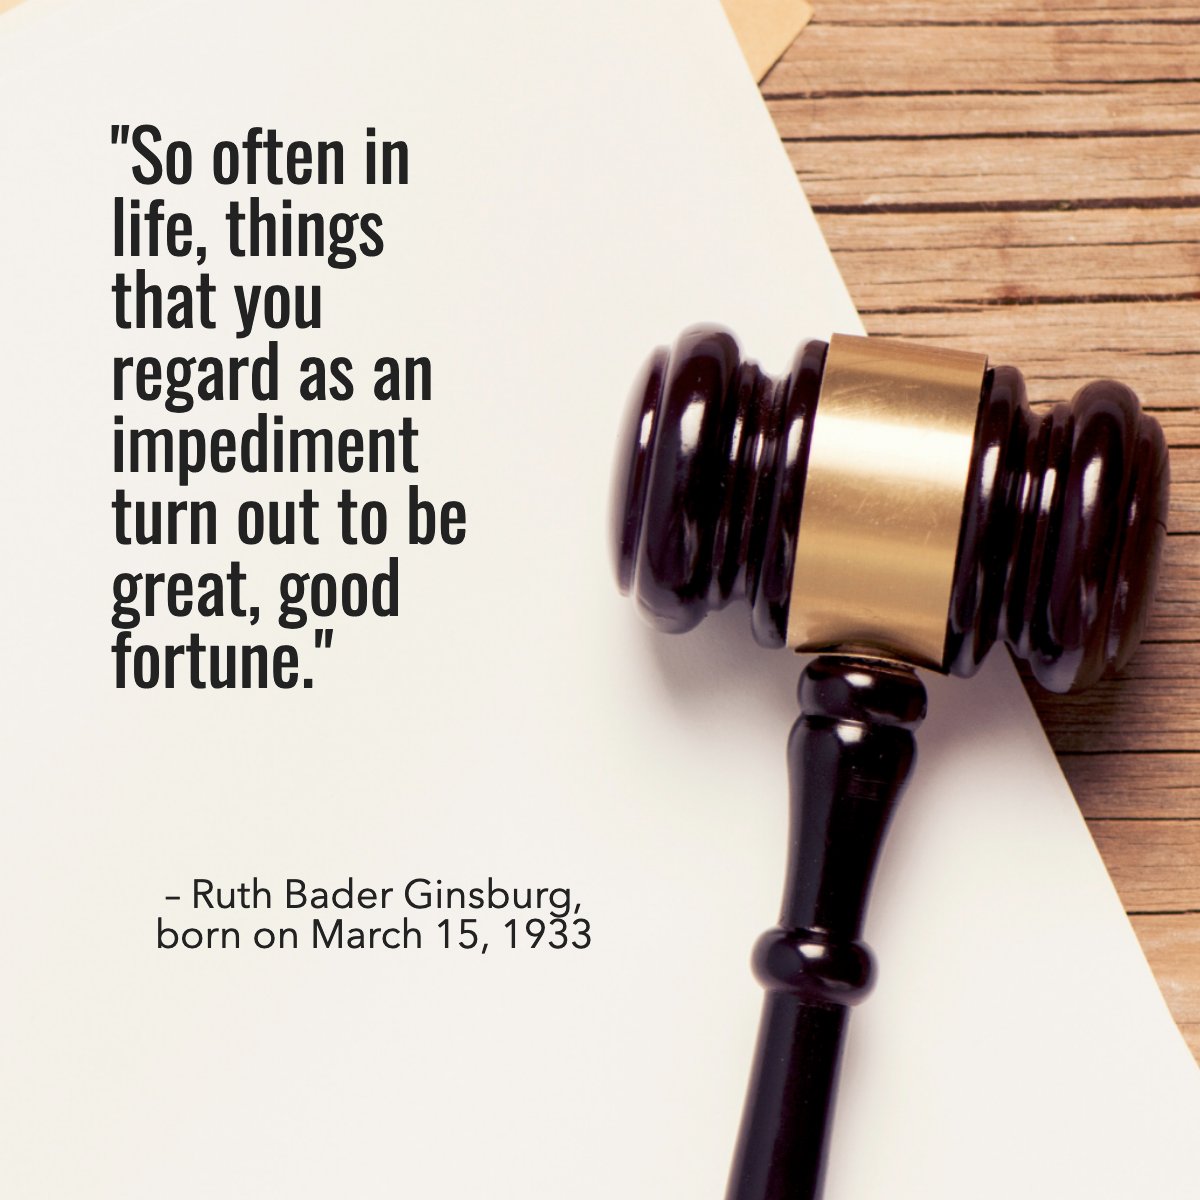 Joan Ruth Bader Ginsburg was an American lawyer and jurist who served as an associate justice of the Supreme Court of the United States from 1993 until her death in September 2020.

#inspiring #ruthbaderginsburg #gavel #quotex  #heidichoiniere #Heidilovesflrealestate